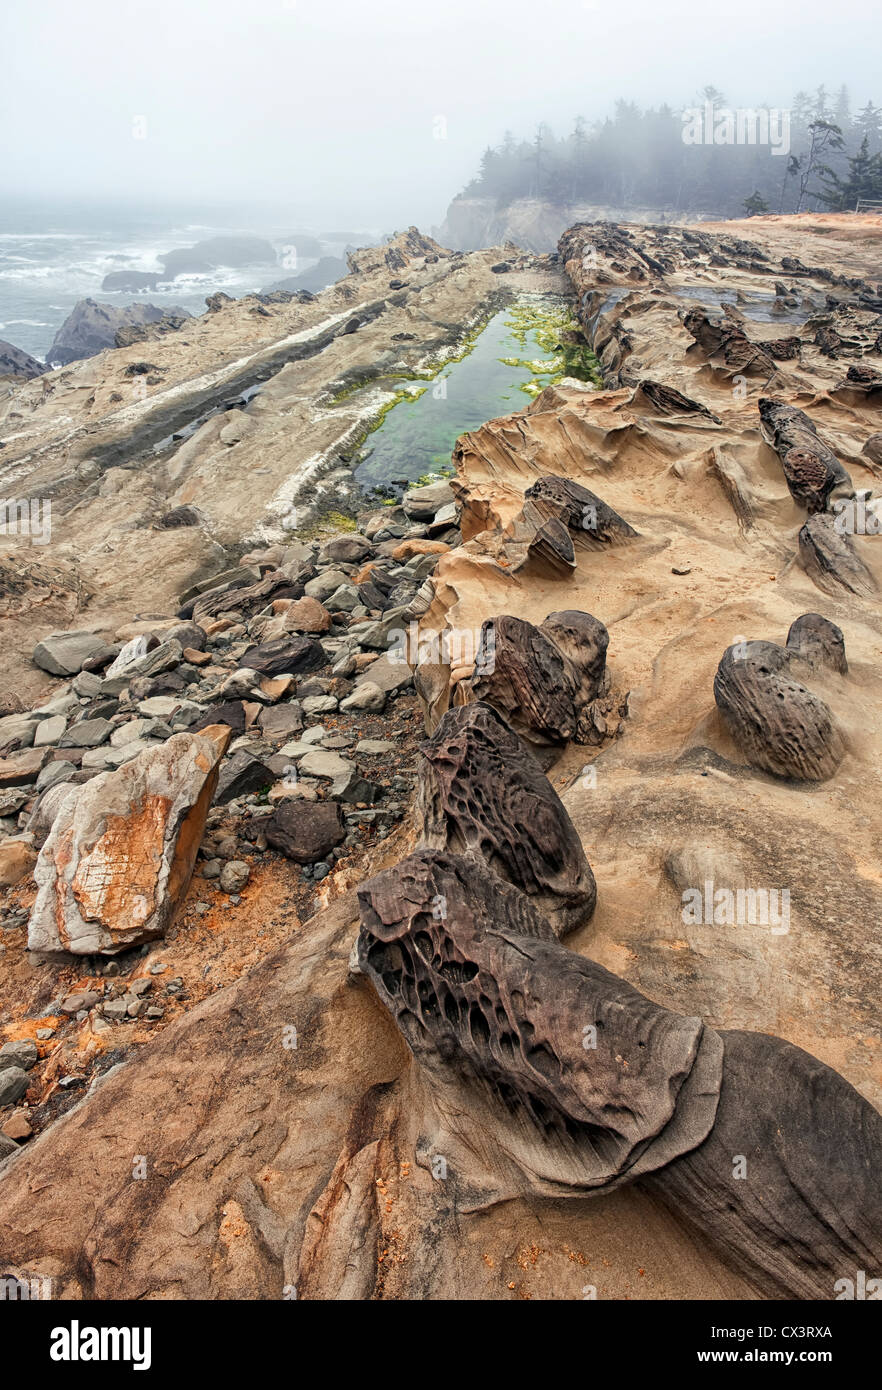 Lifting fog reveals wind and wave sculptured sandstone formations among the cliffs at Oregon’s Shore Acres State Park Stock Photo